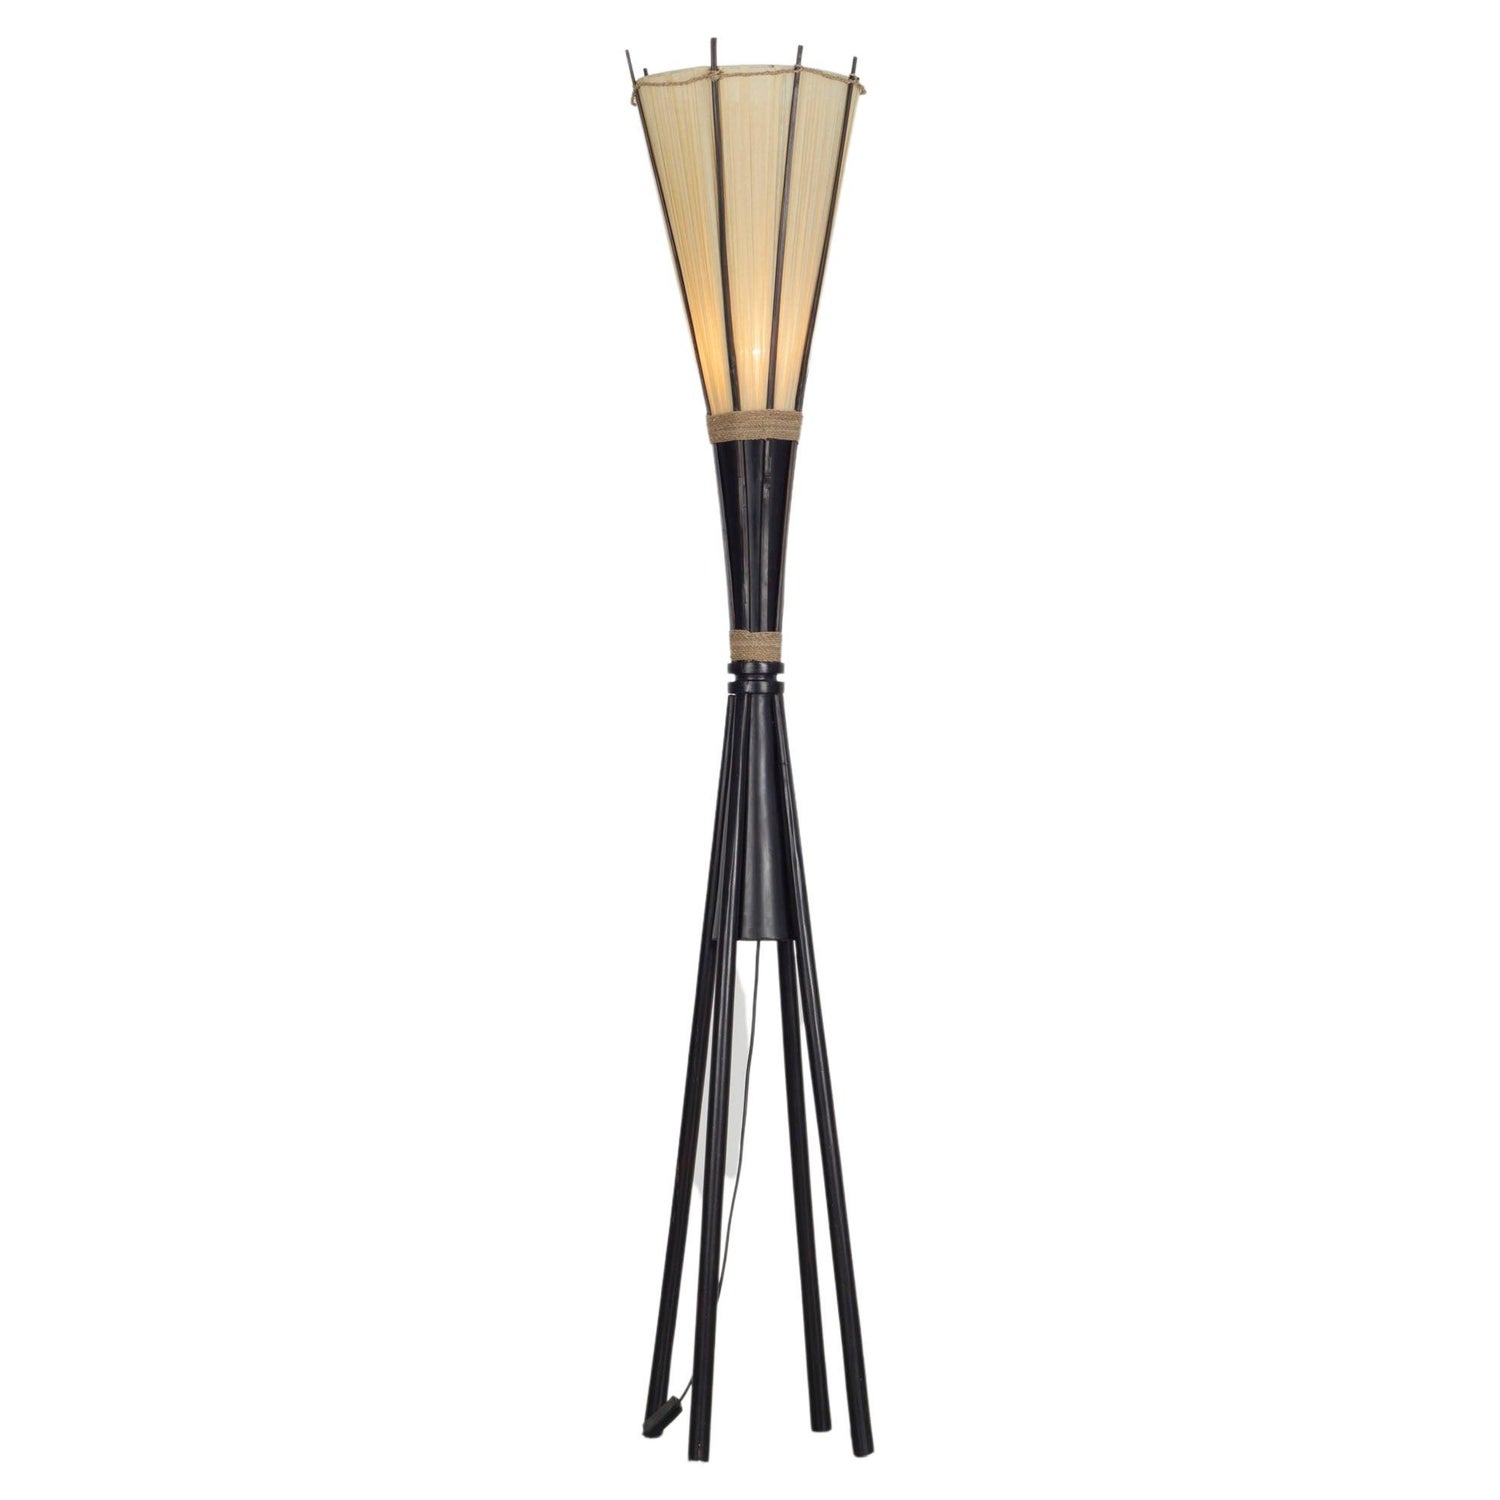 German Three-Legged Floor Lamp from the 50s For Sale at 1stDibs